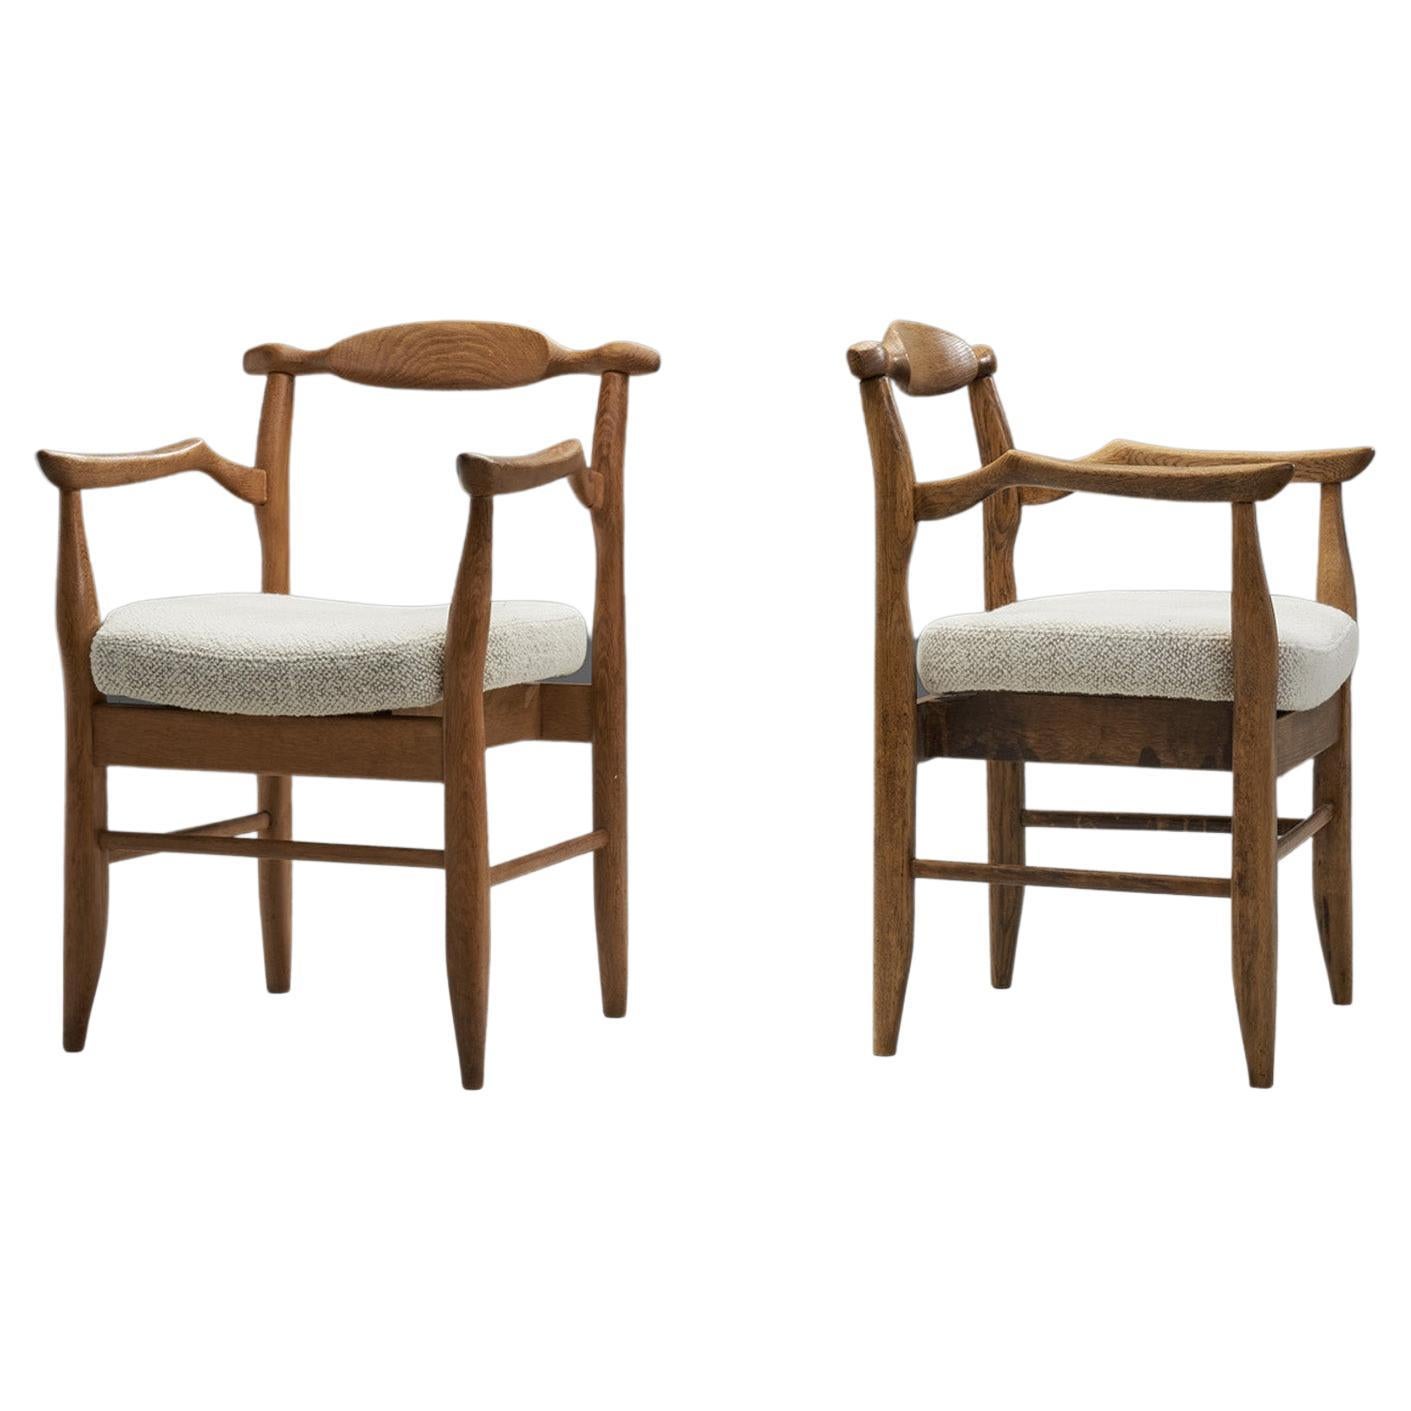 Guillerme et Chambron “Bridge Fumay” Pair of Dining Chairs, France 1960s For Sale